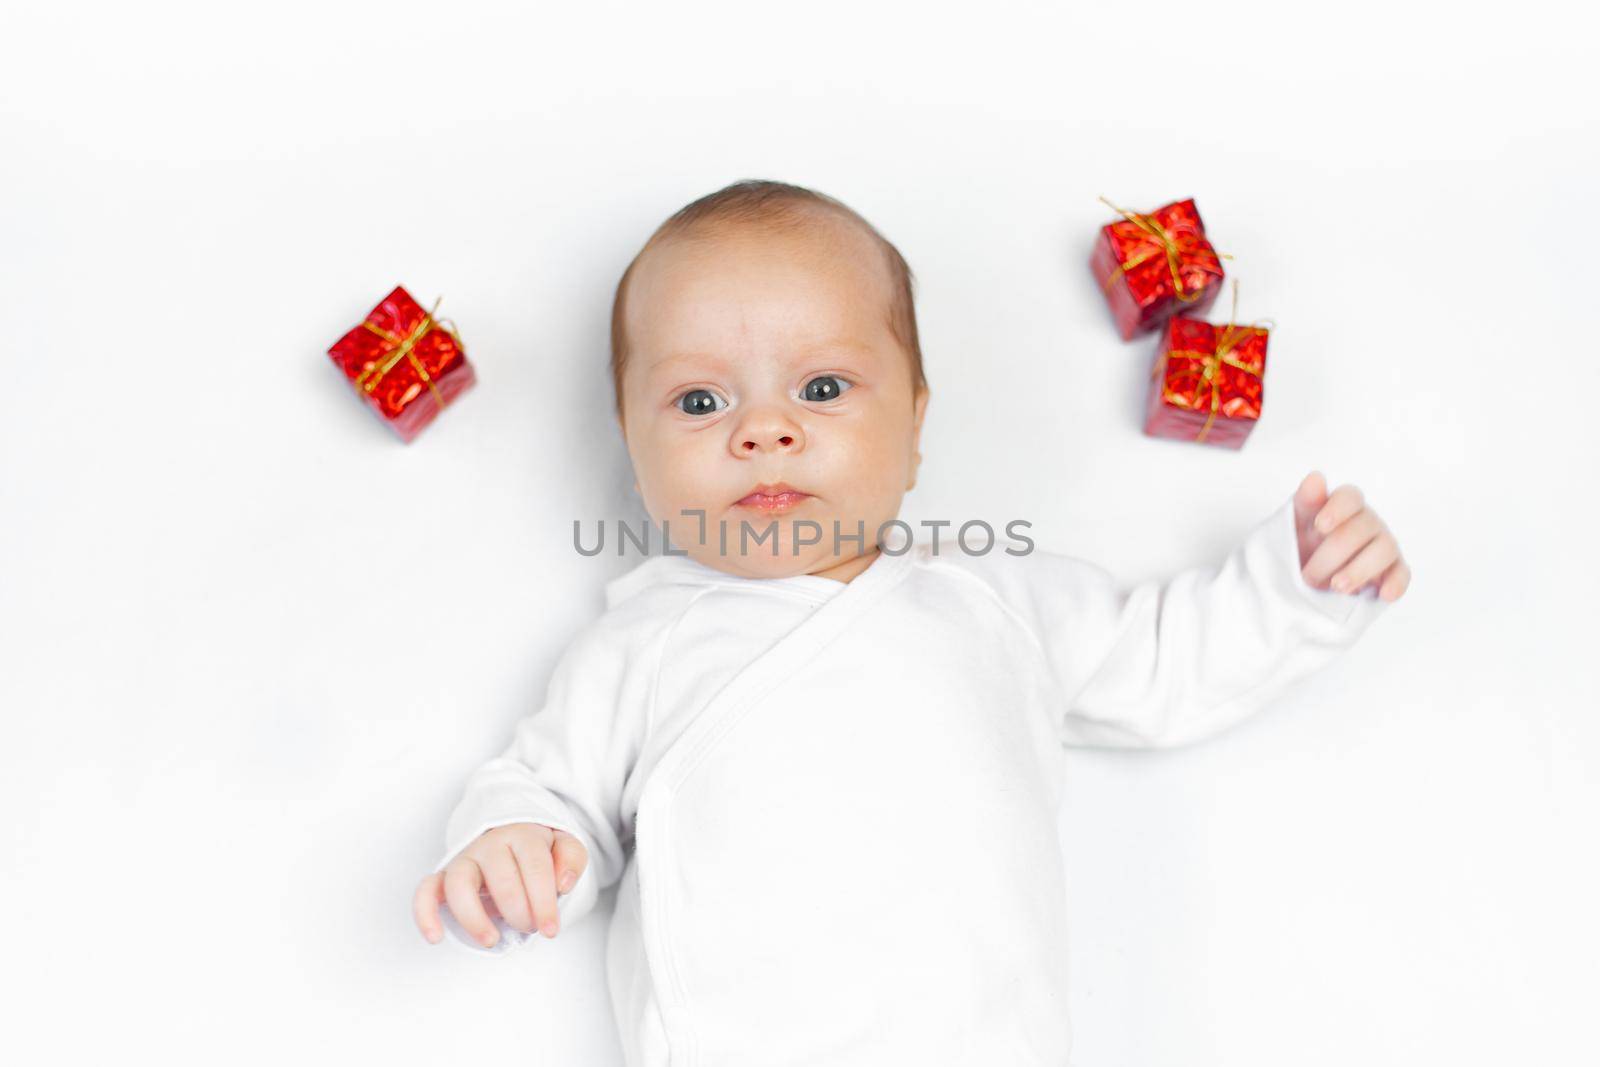 Baby and New Year 's gifts . An article about the New Year . Choosing a children 's gift . Baby on a white background